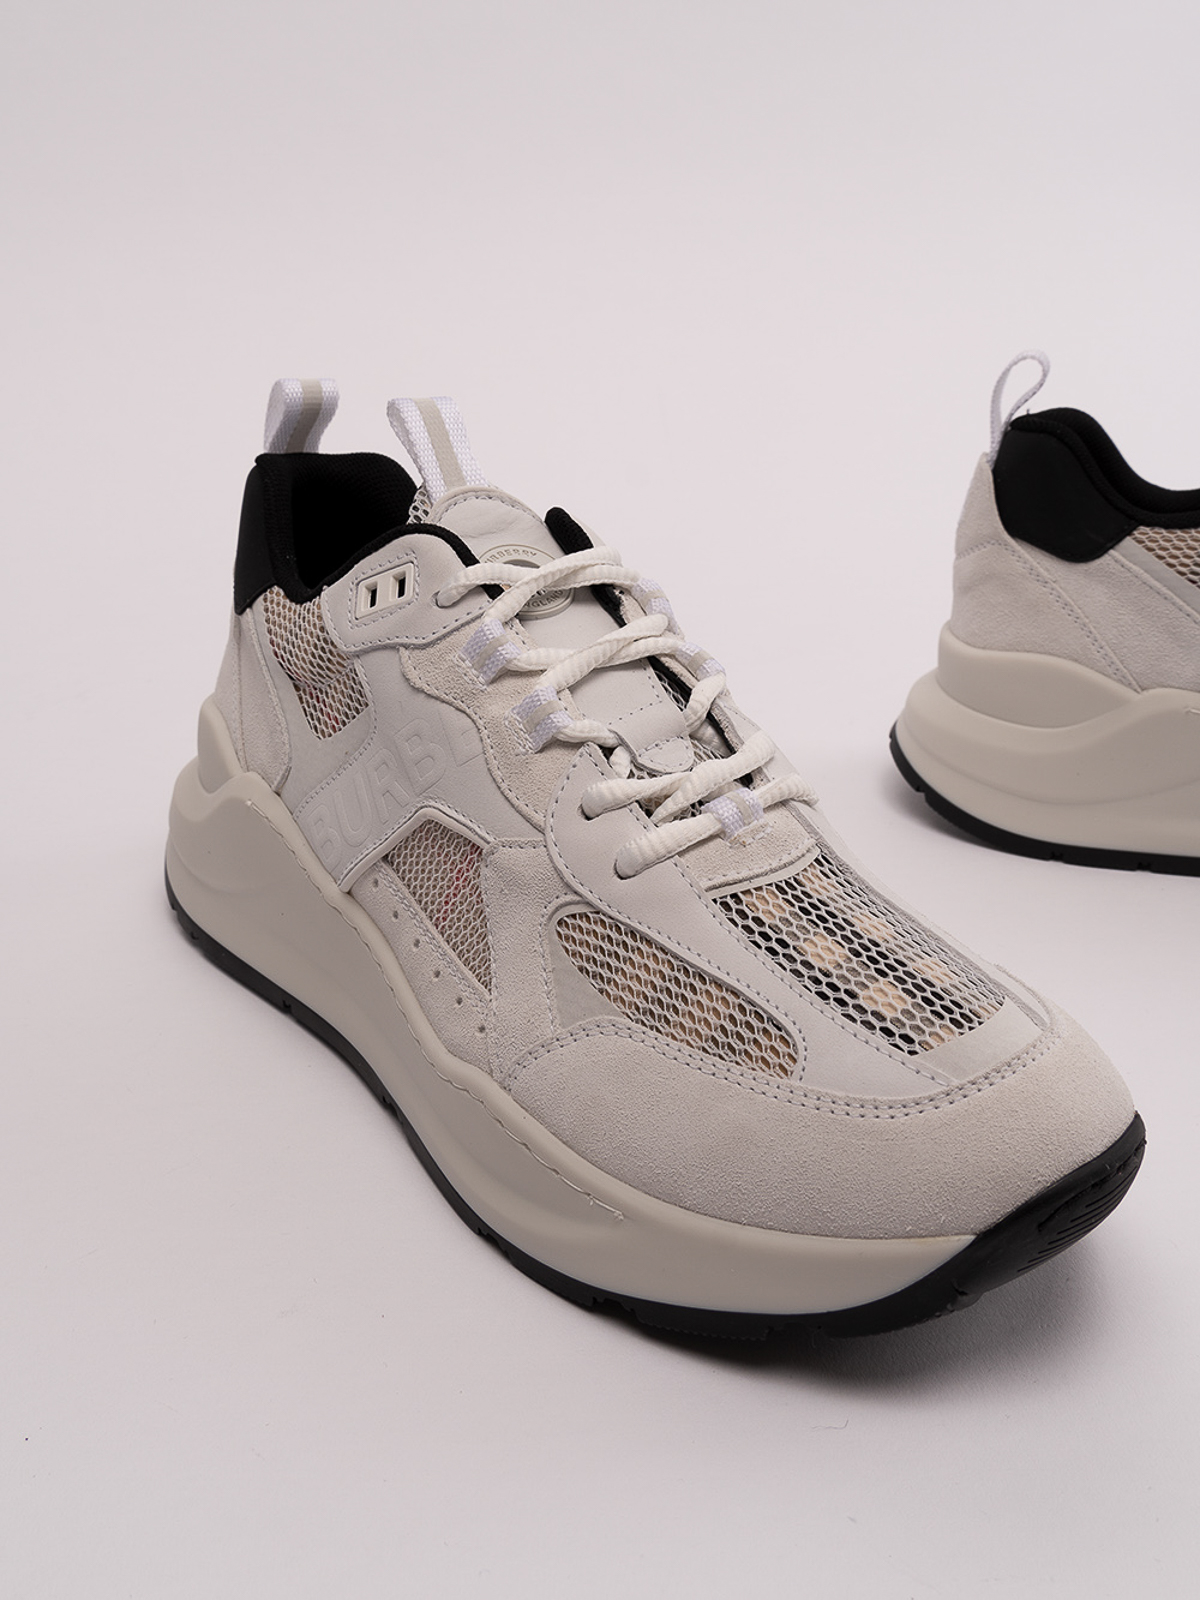 Trainers Burberry - Sean sneakers - 8061880 | Shop online at iKRIX